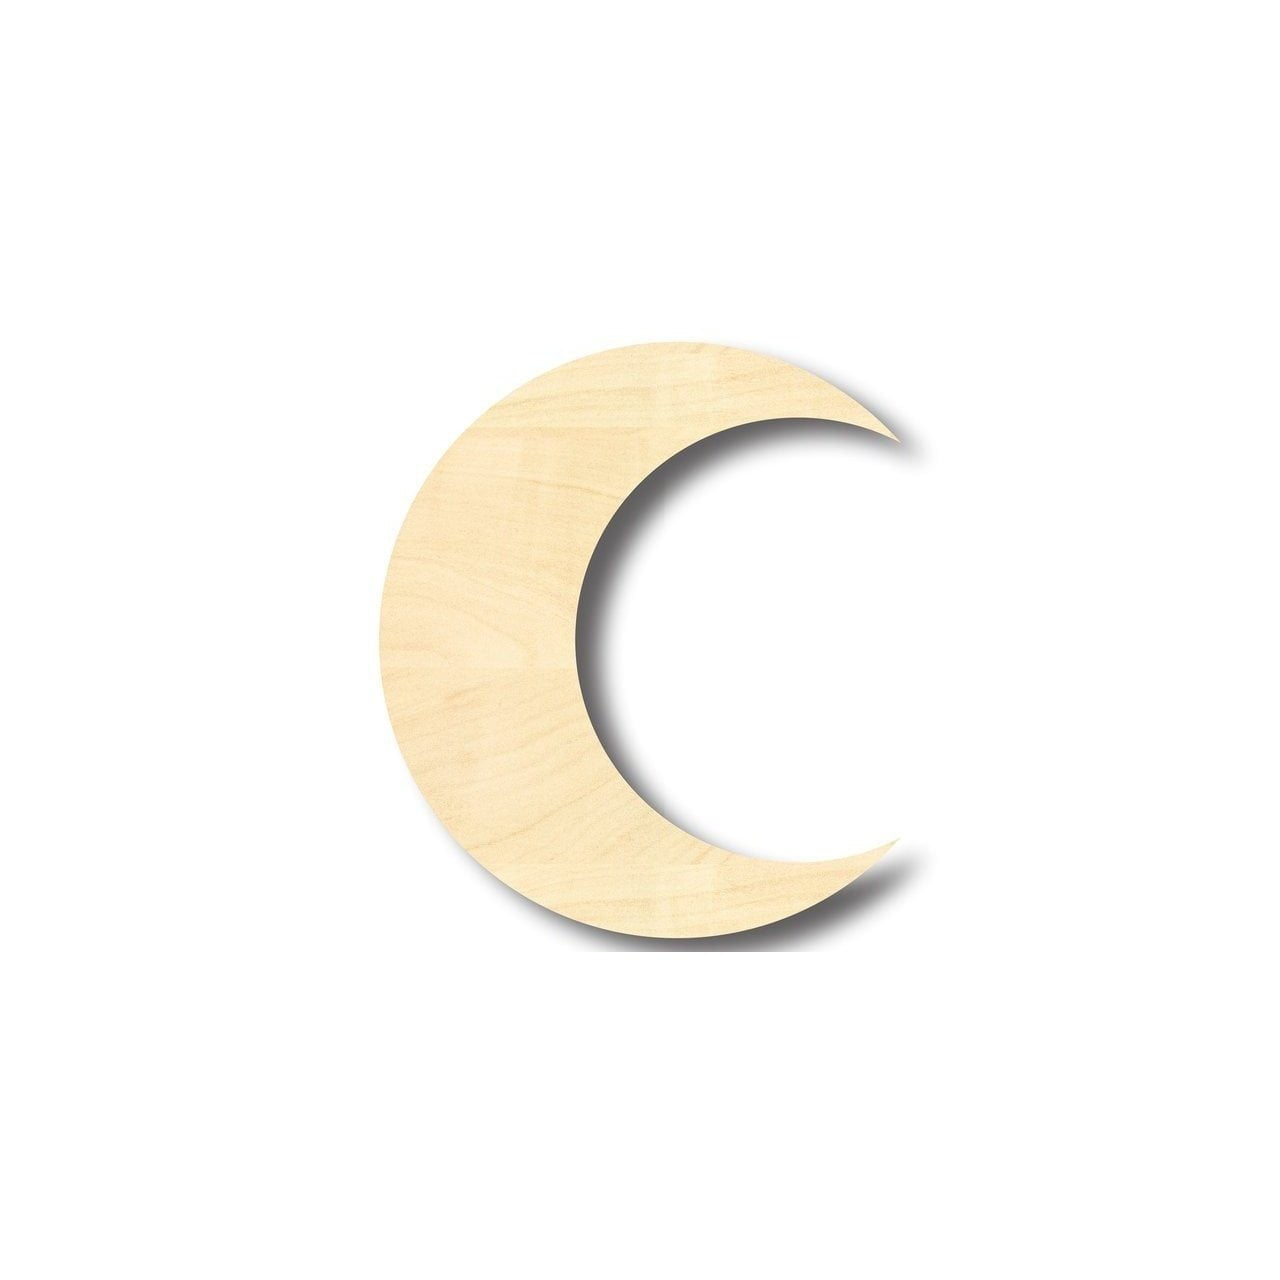 Crescent Moon Laser Cut Out Unfinished Wood Shape Craft